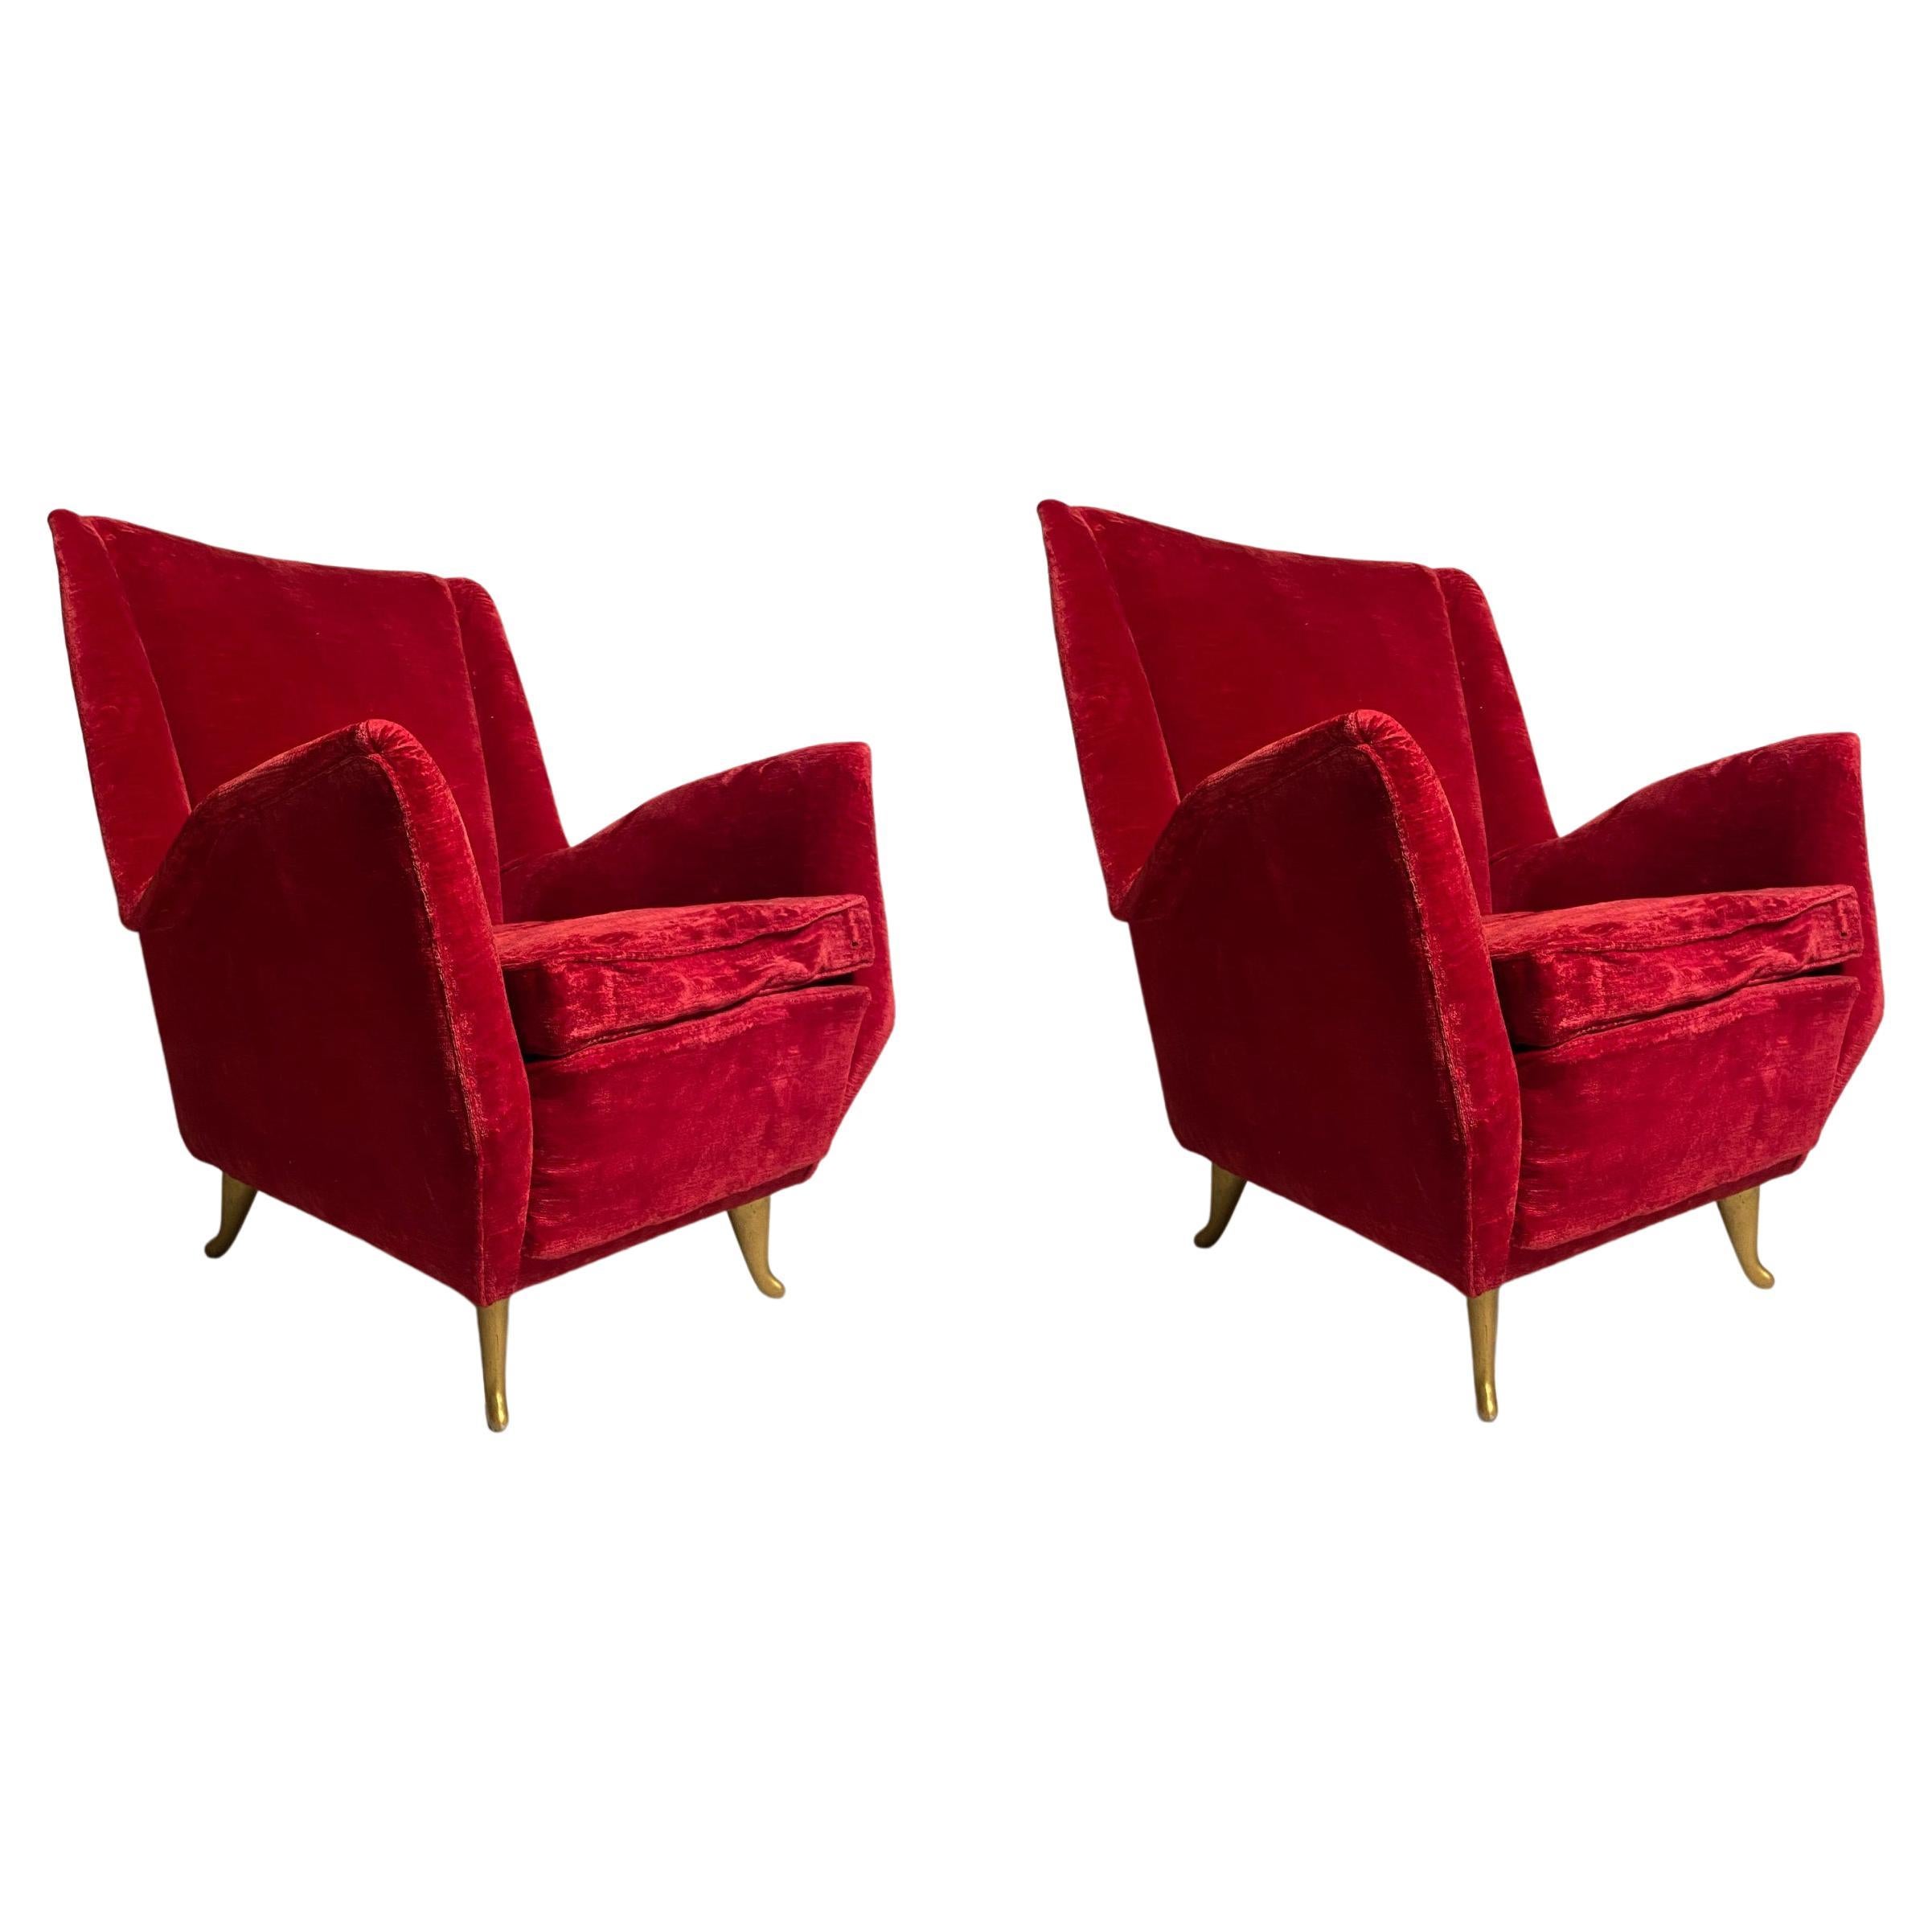 Gio Ponti (Attr.), Set of two Wingback Chairs for I.S.A. Bergamo, Italy, 1950s